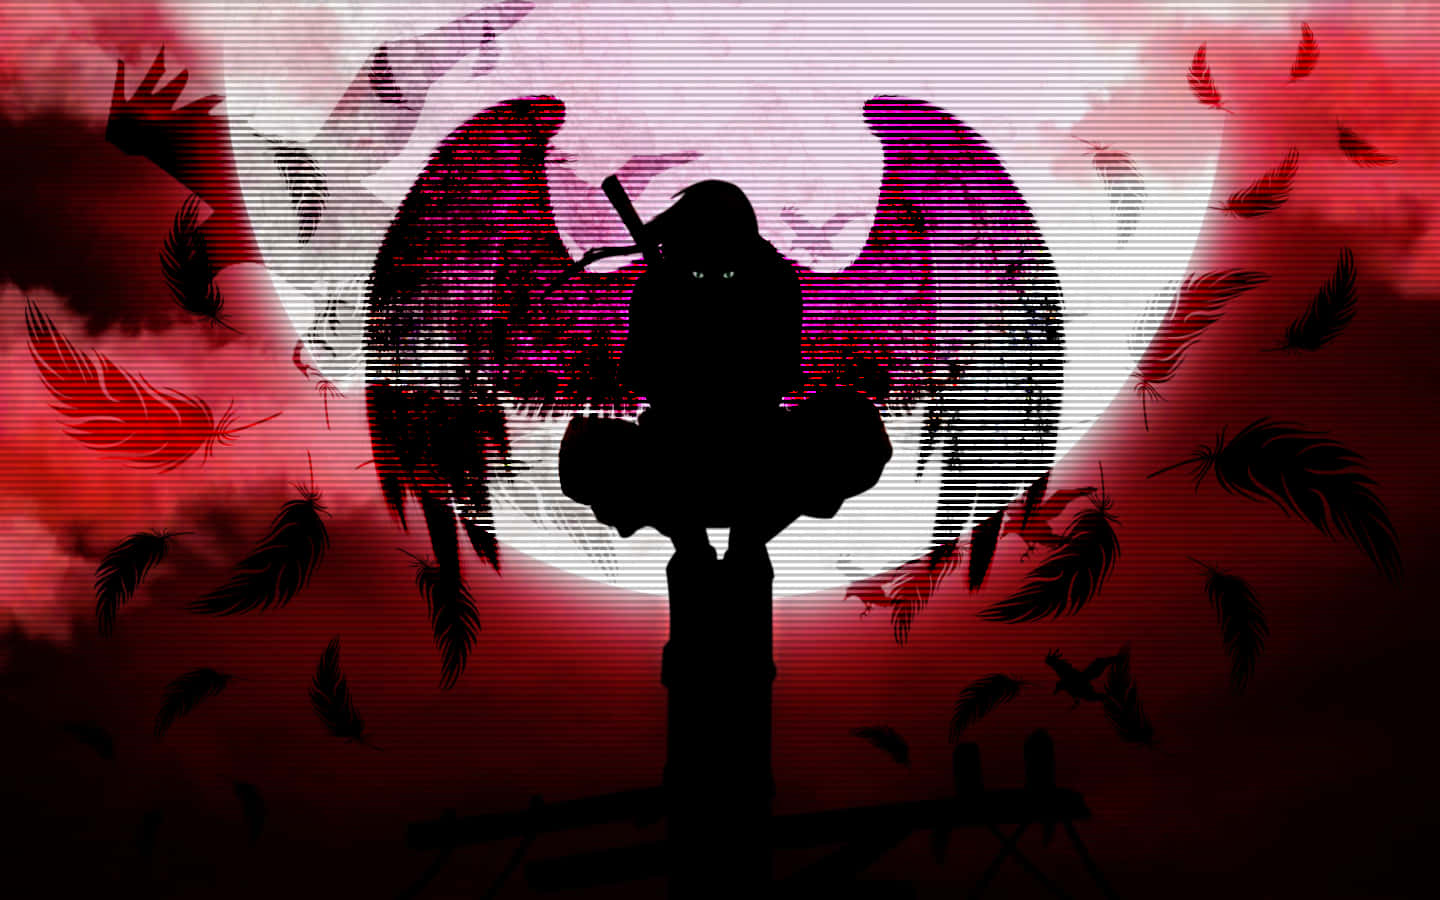 A Silhouette Of An Angel With Wings On A Pole